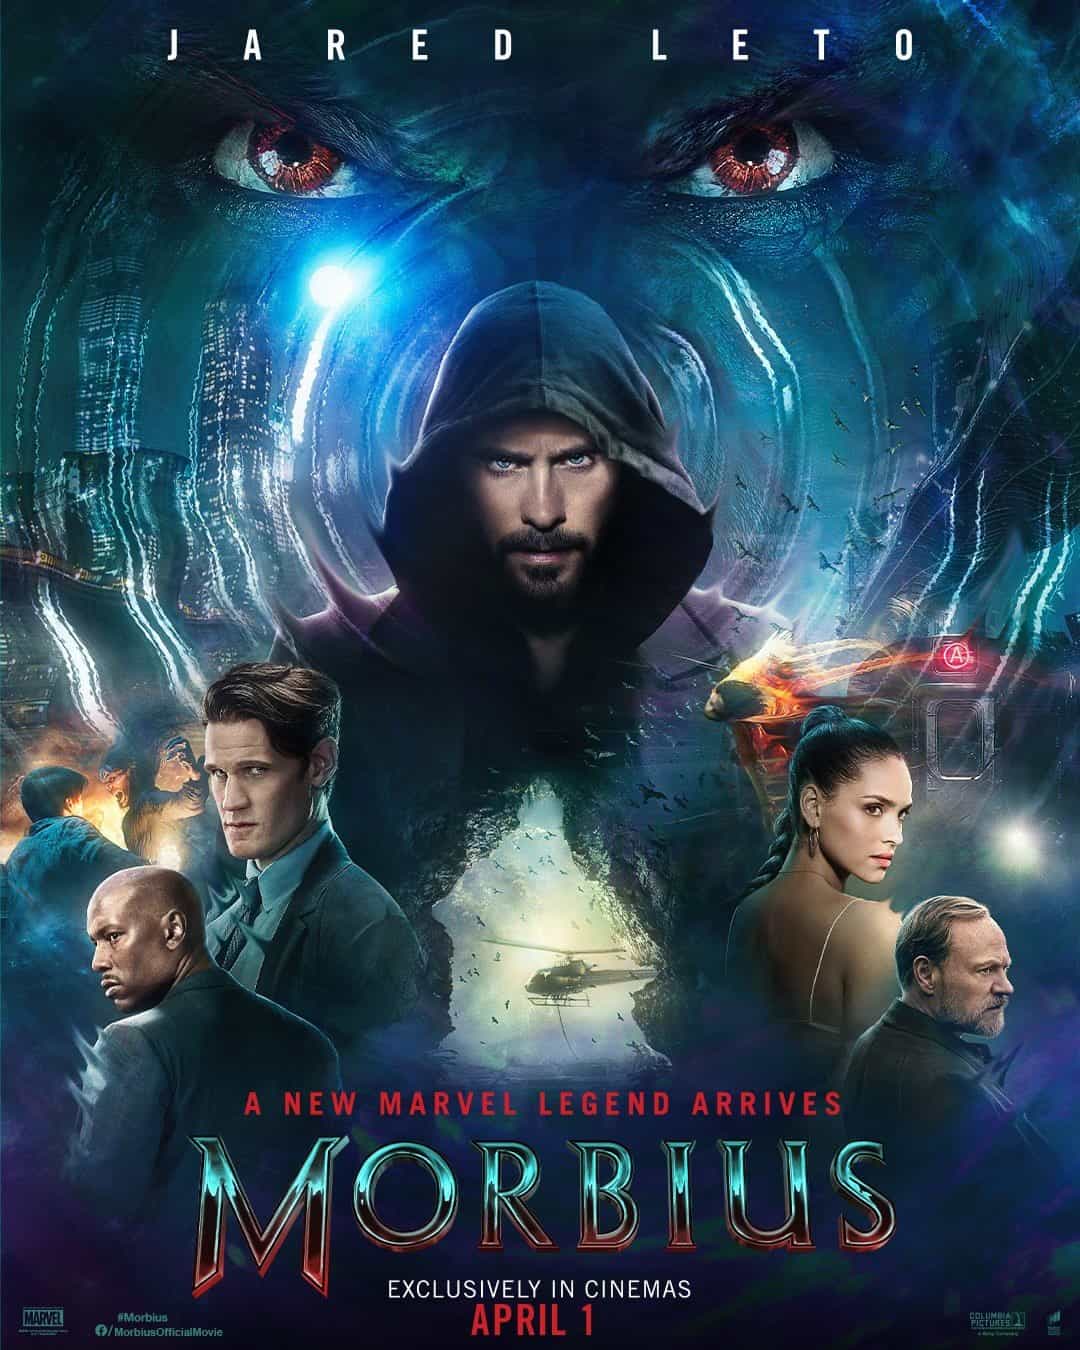 US Box Office Weekend Report 1st - 3rd April 2022: Morbius makes its debut at the top of the North America box office with $39 Million